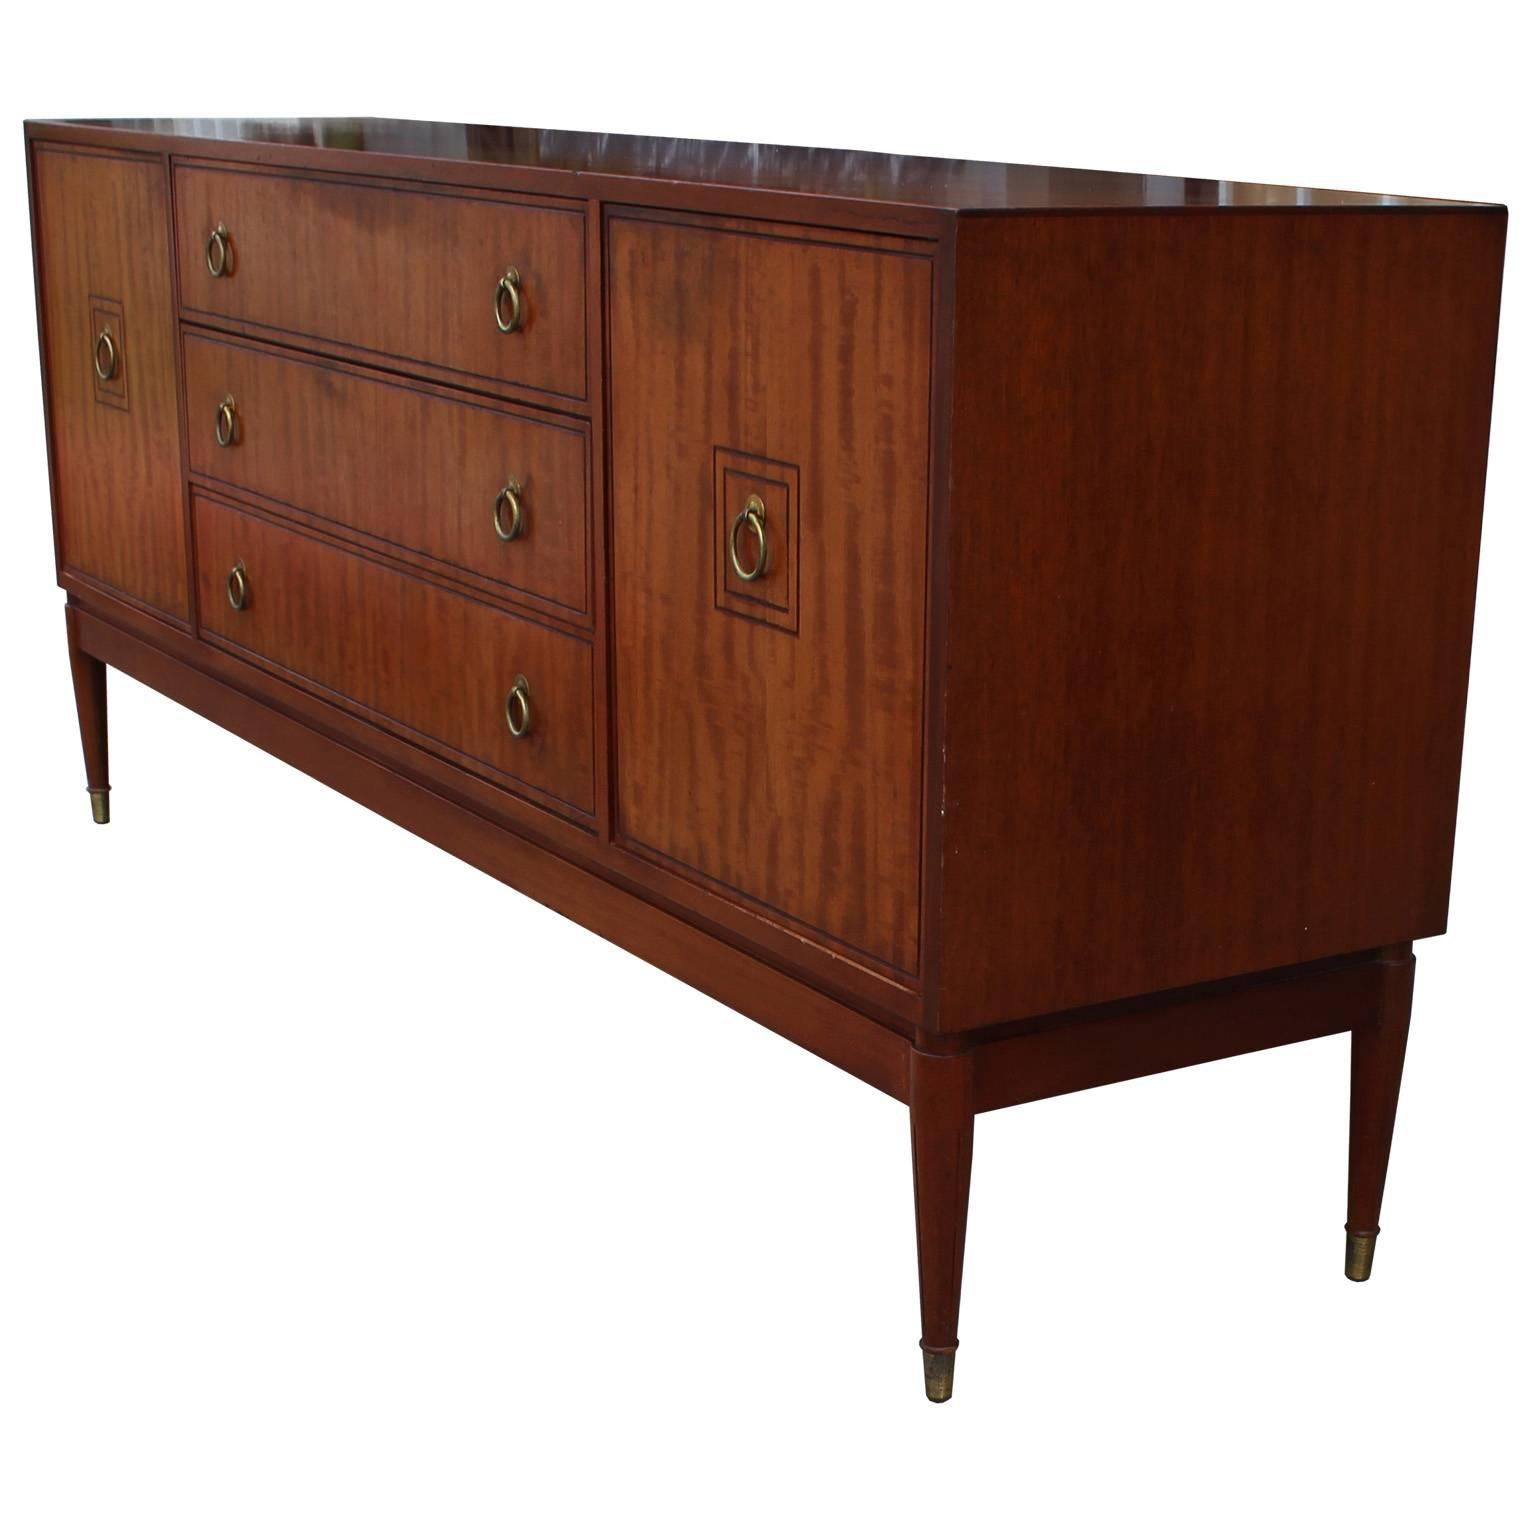 Elegant English sideboard or credenza. Sideboard has clean lines with a touch of traditional detailing making a perfect transitional of Hollywood Regency piece. Shiny brass ring pulls and caps finish the piece. Two cabinet doors open to a single